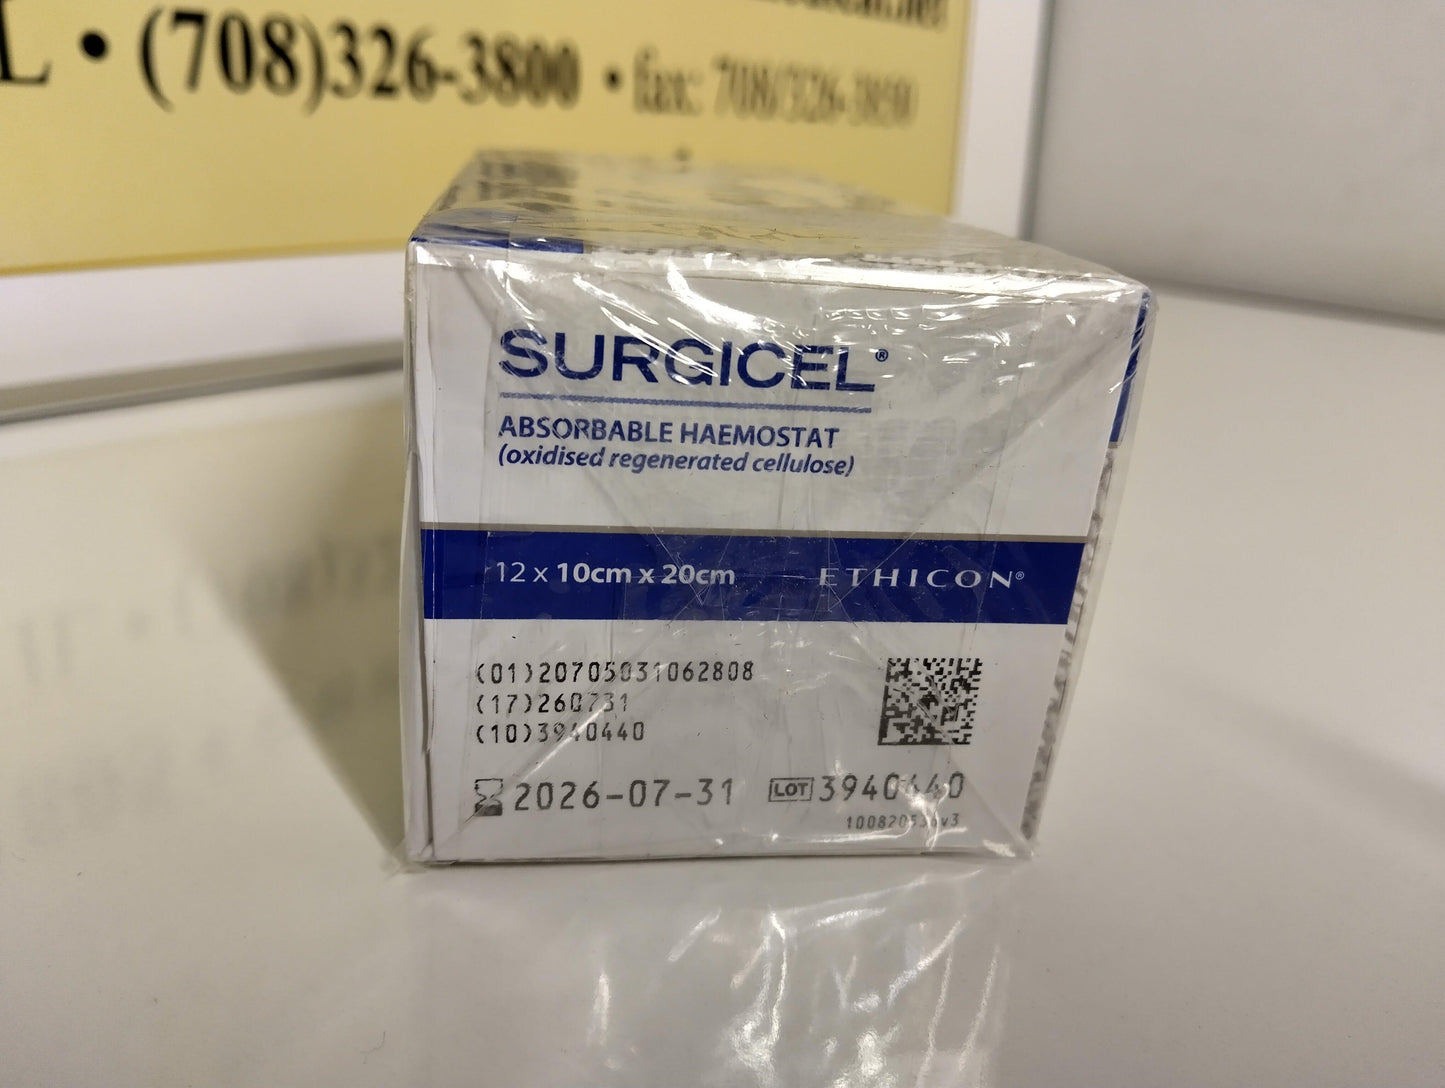 NEW Box/12 Ethicon SURGICEL Absorbable Haemostat 1902GB Expire 2026-07-31 - MBR Medicals